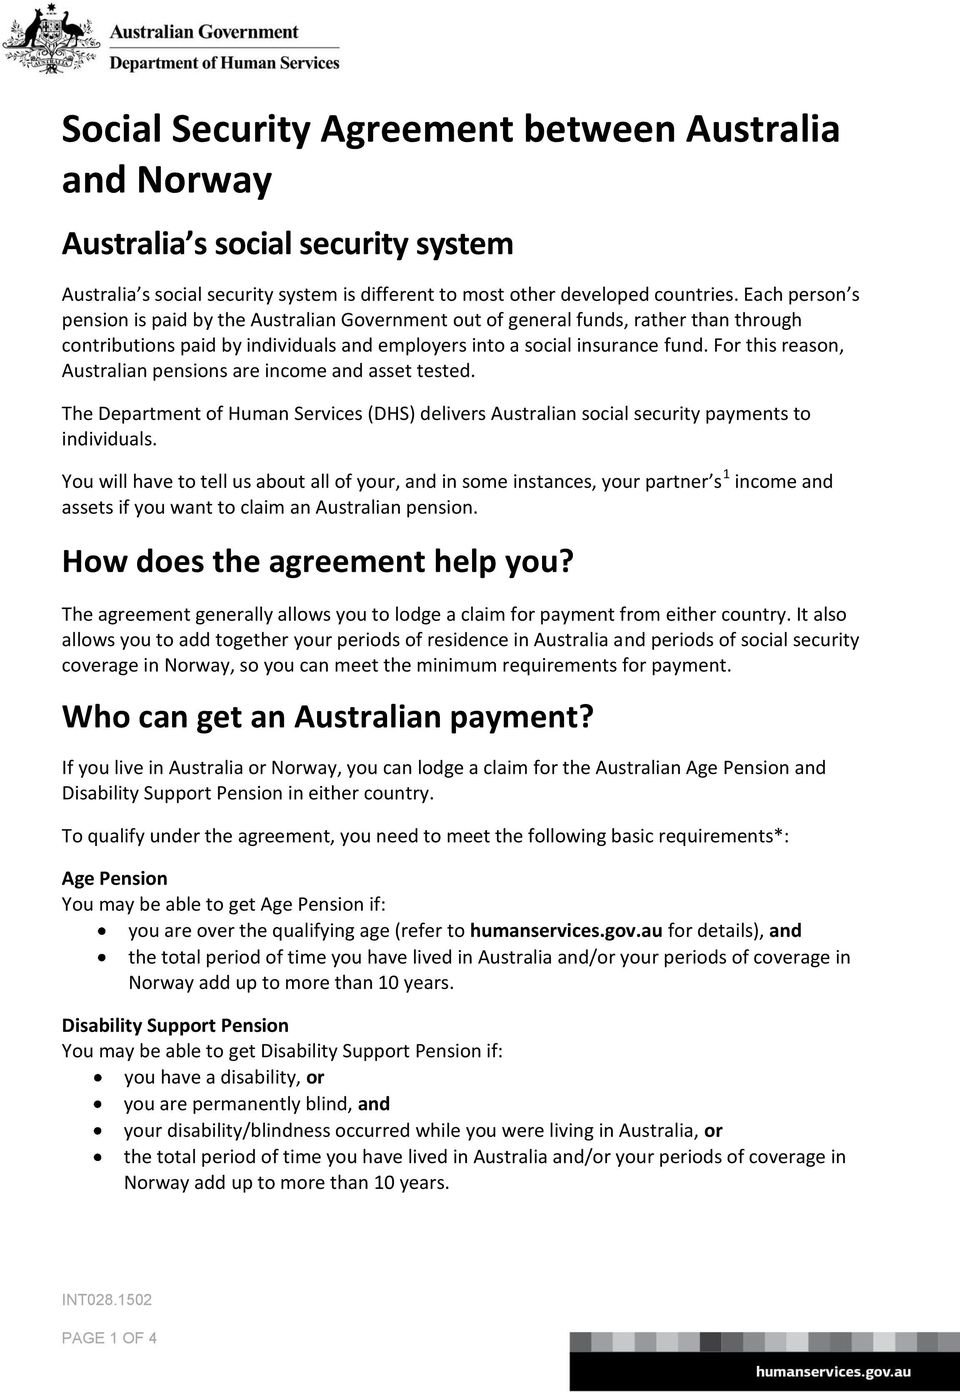 For this reason, Australian pensions are income and asset tested. The (DHS) delivers Australian social security payments to individuals.